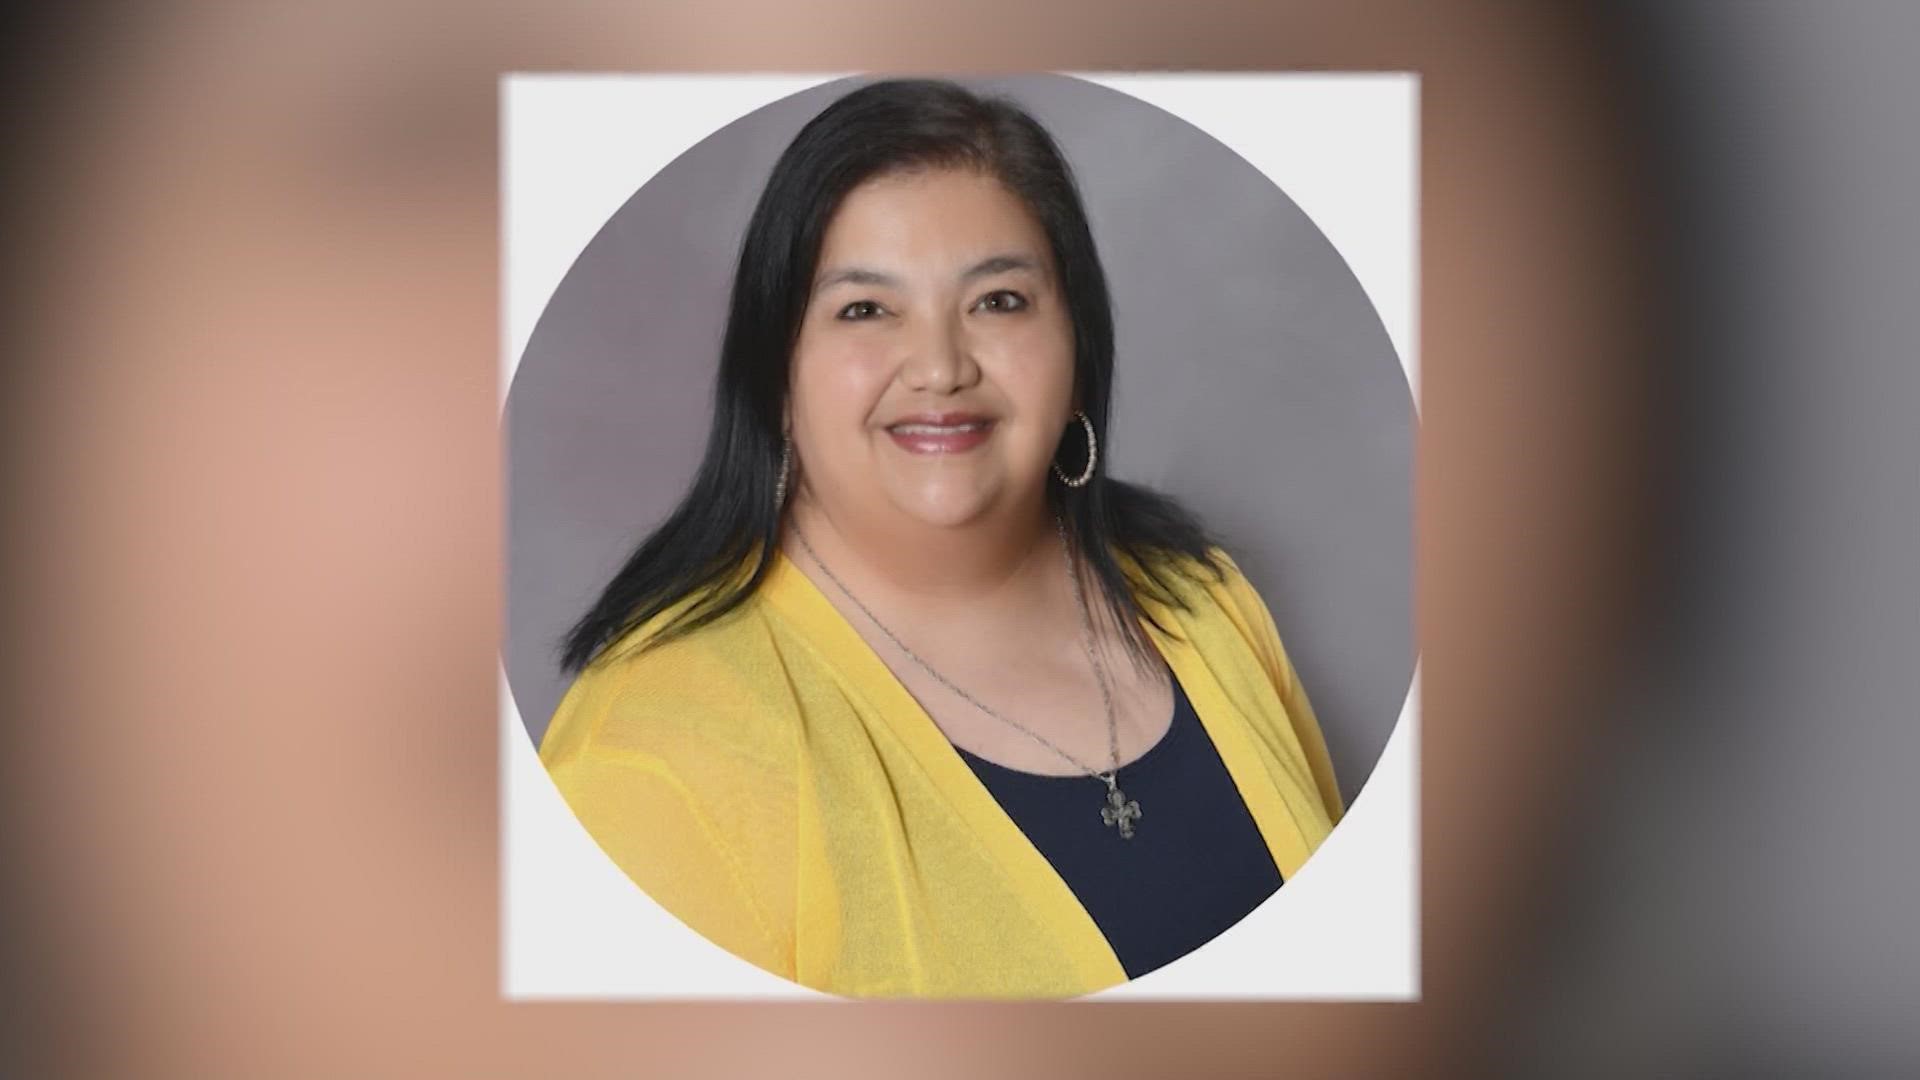 The now former principal accepted a different job in the Uvalde CISD school district.